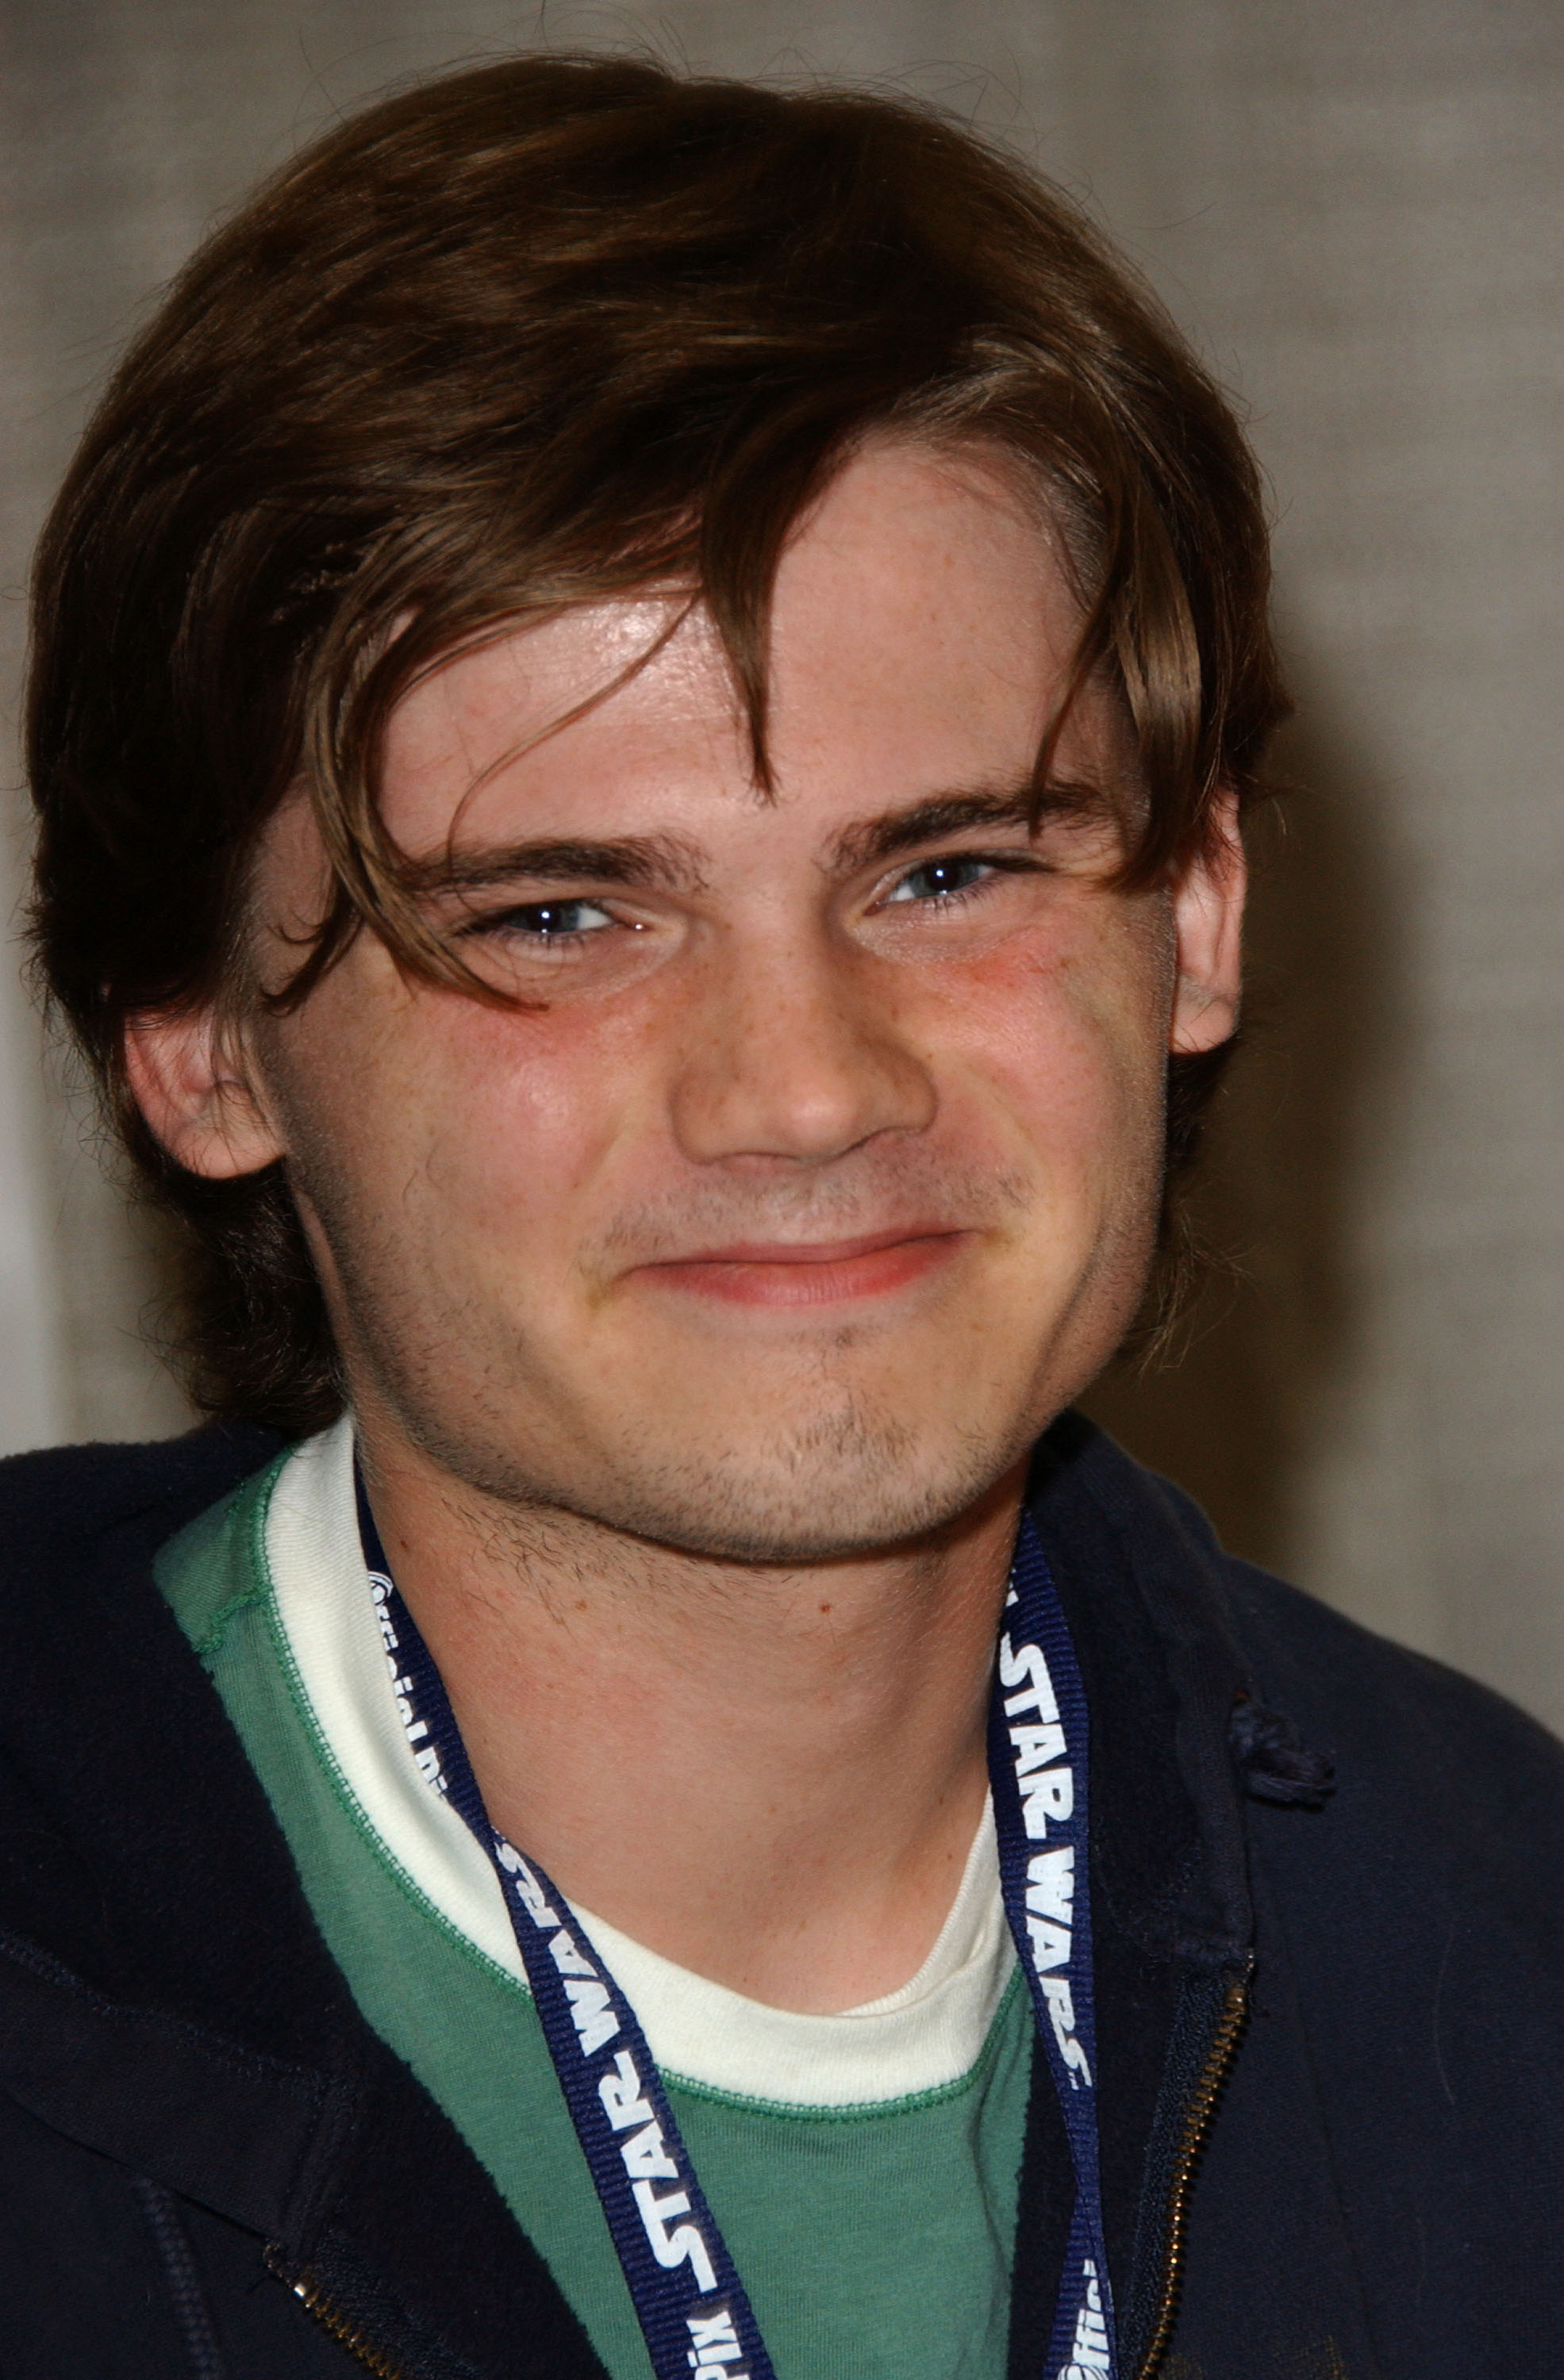 Jake Lloyd on May 26, 2007 | Source: Getty Images